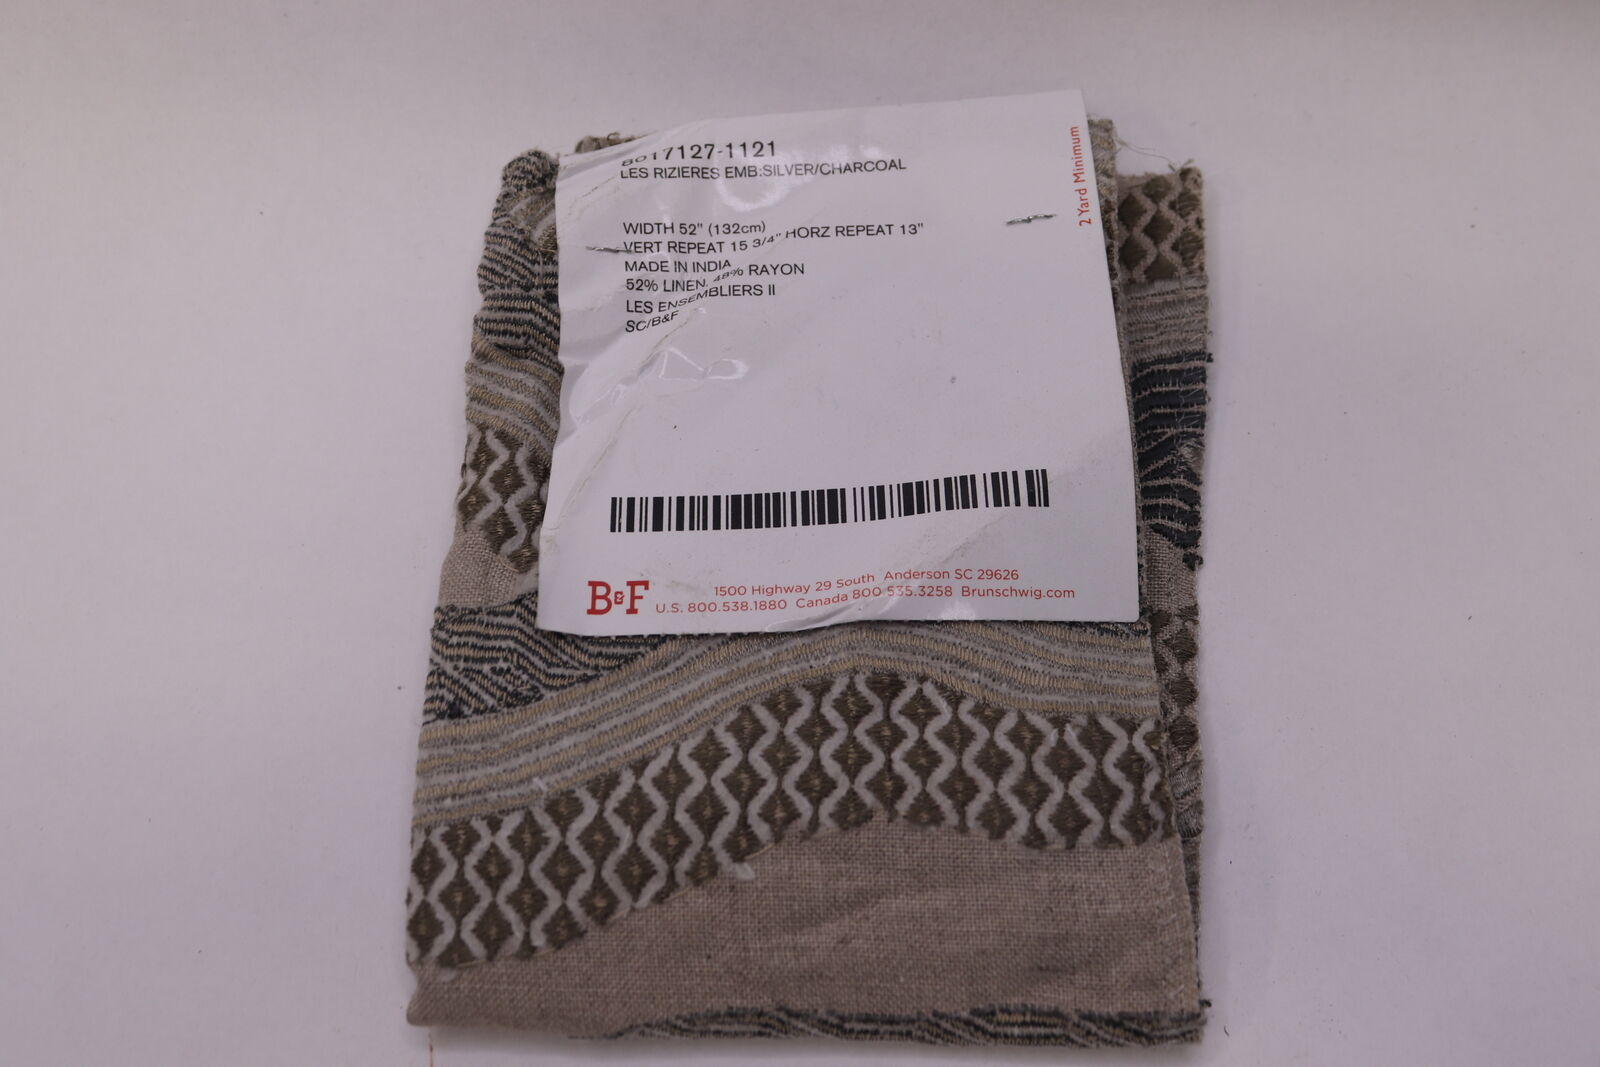 Brunschwig & Fils Les Rizieres Emb Silver/Charcoal Fabric 8017127-1121